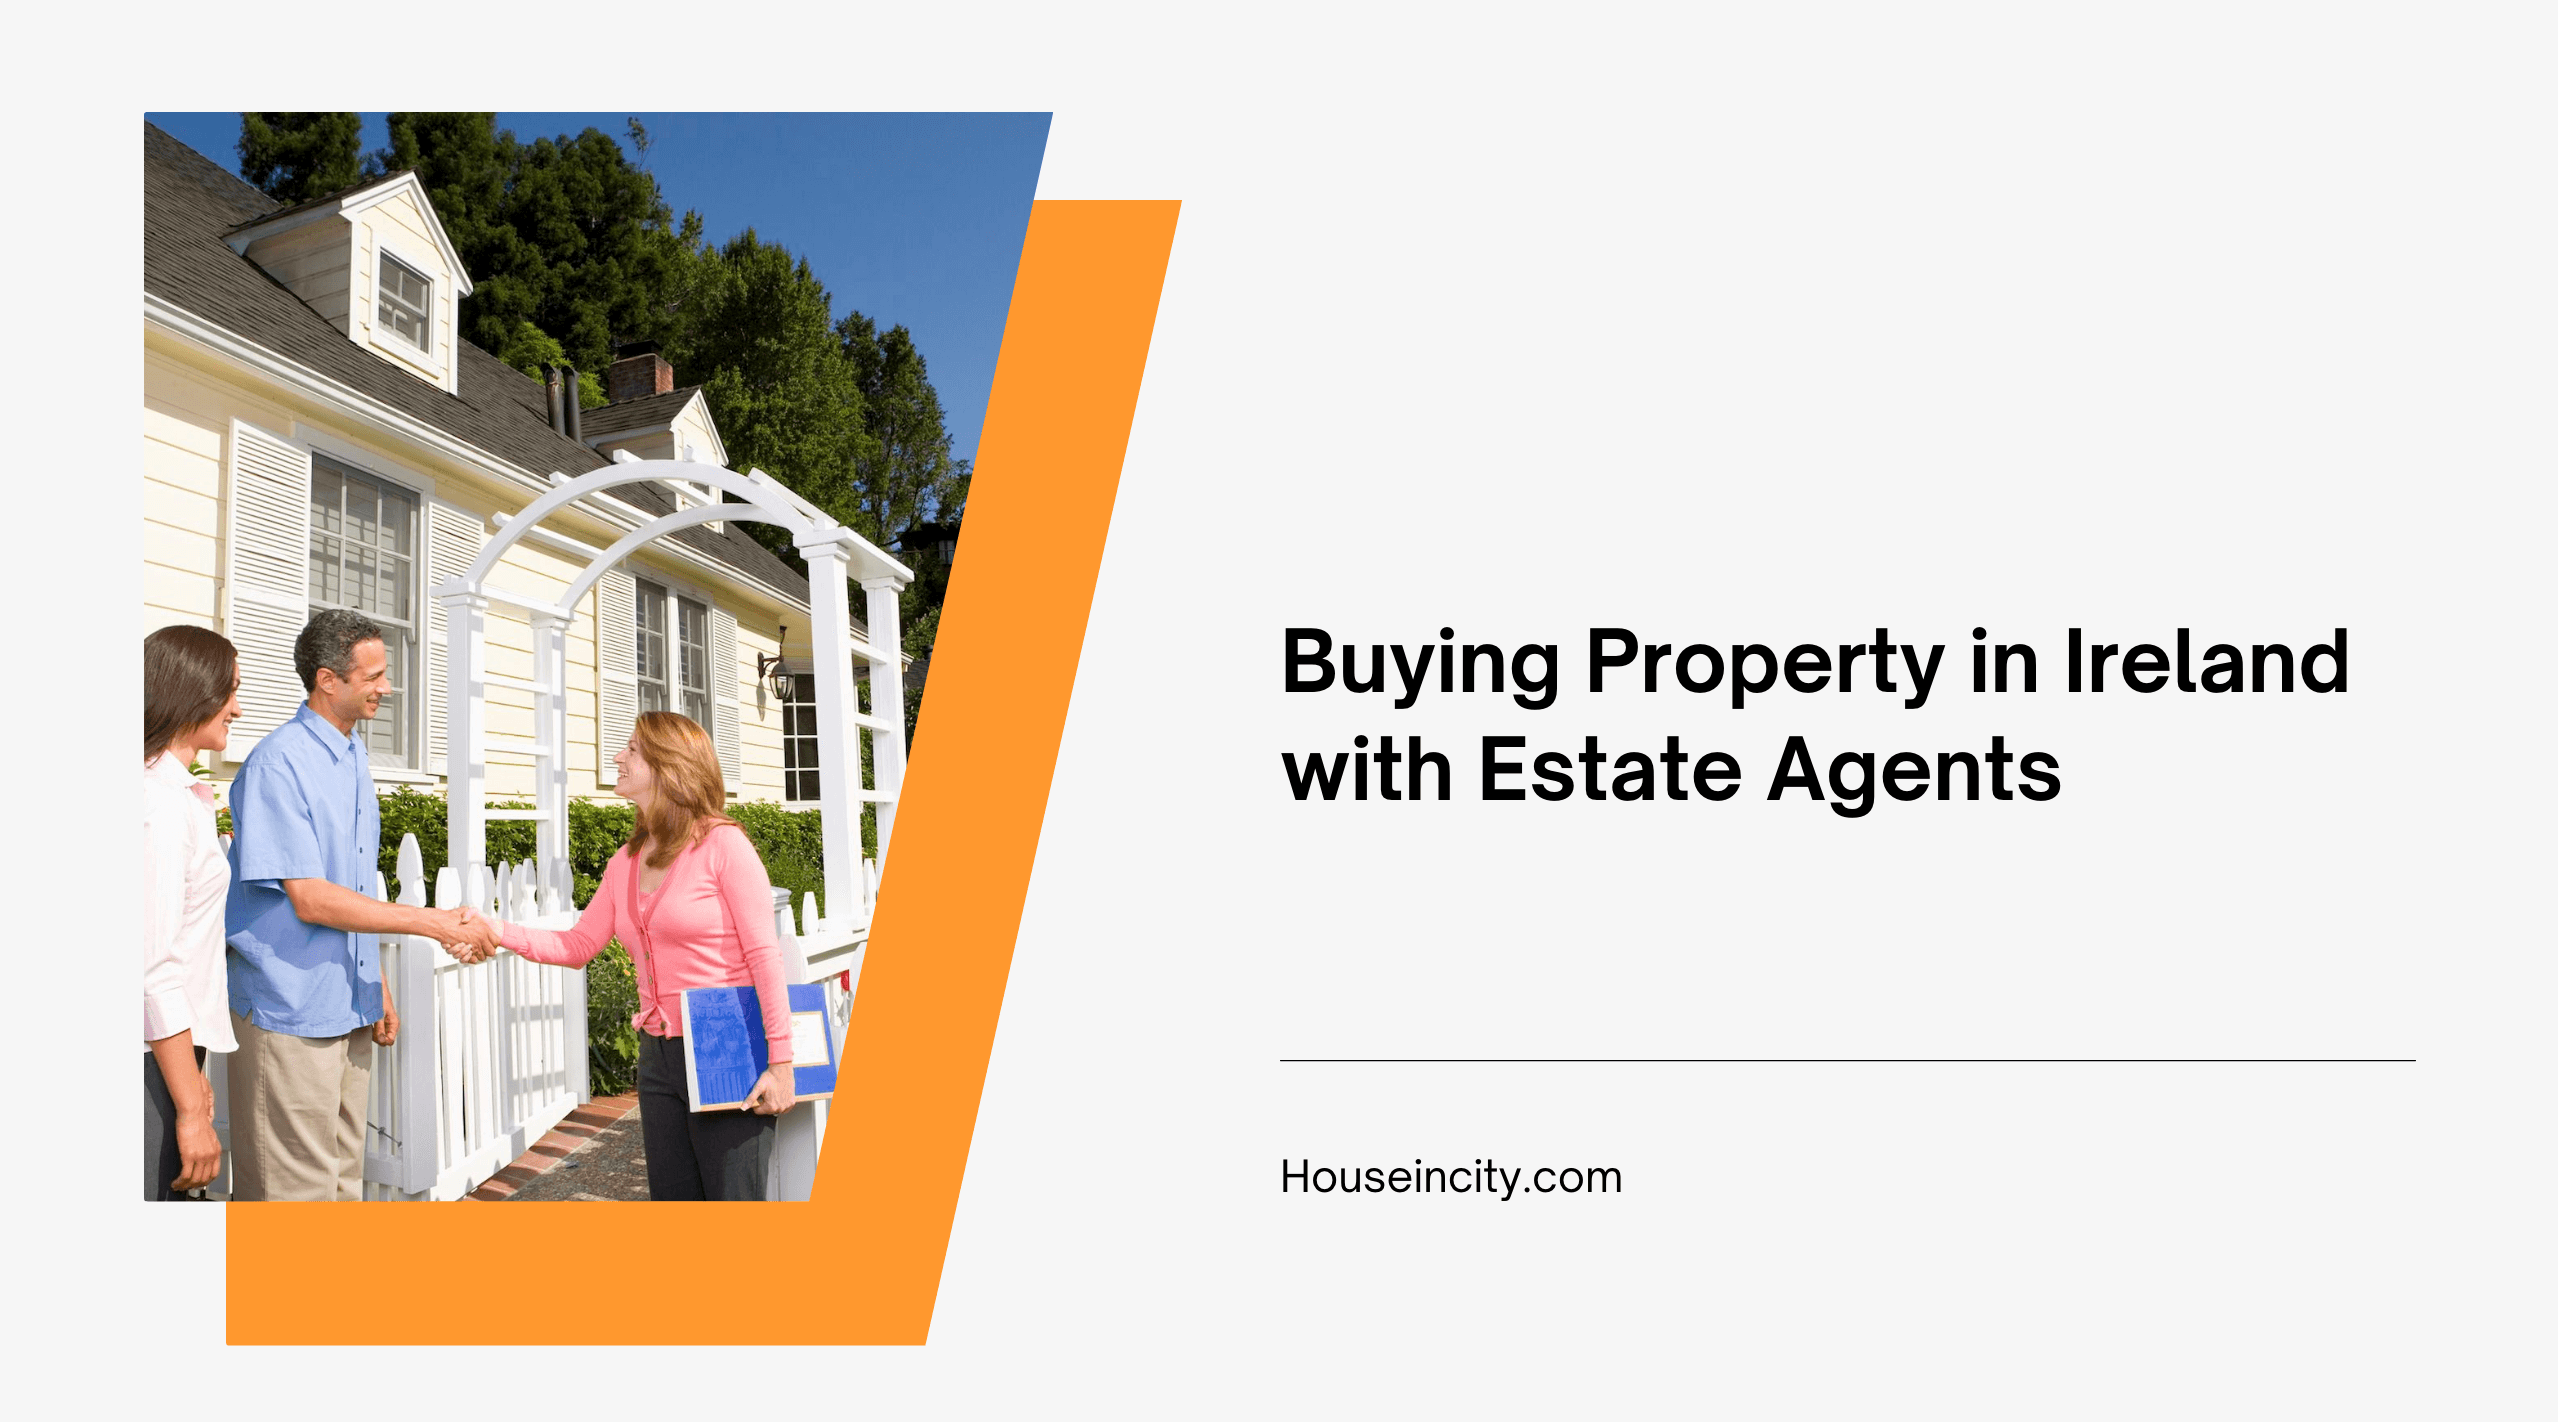 Buying Property in Ireland with Estate Agents